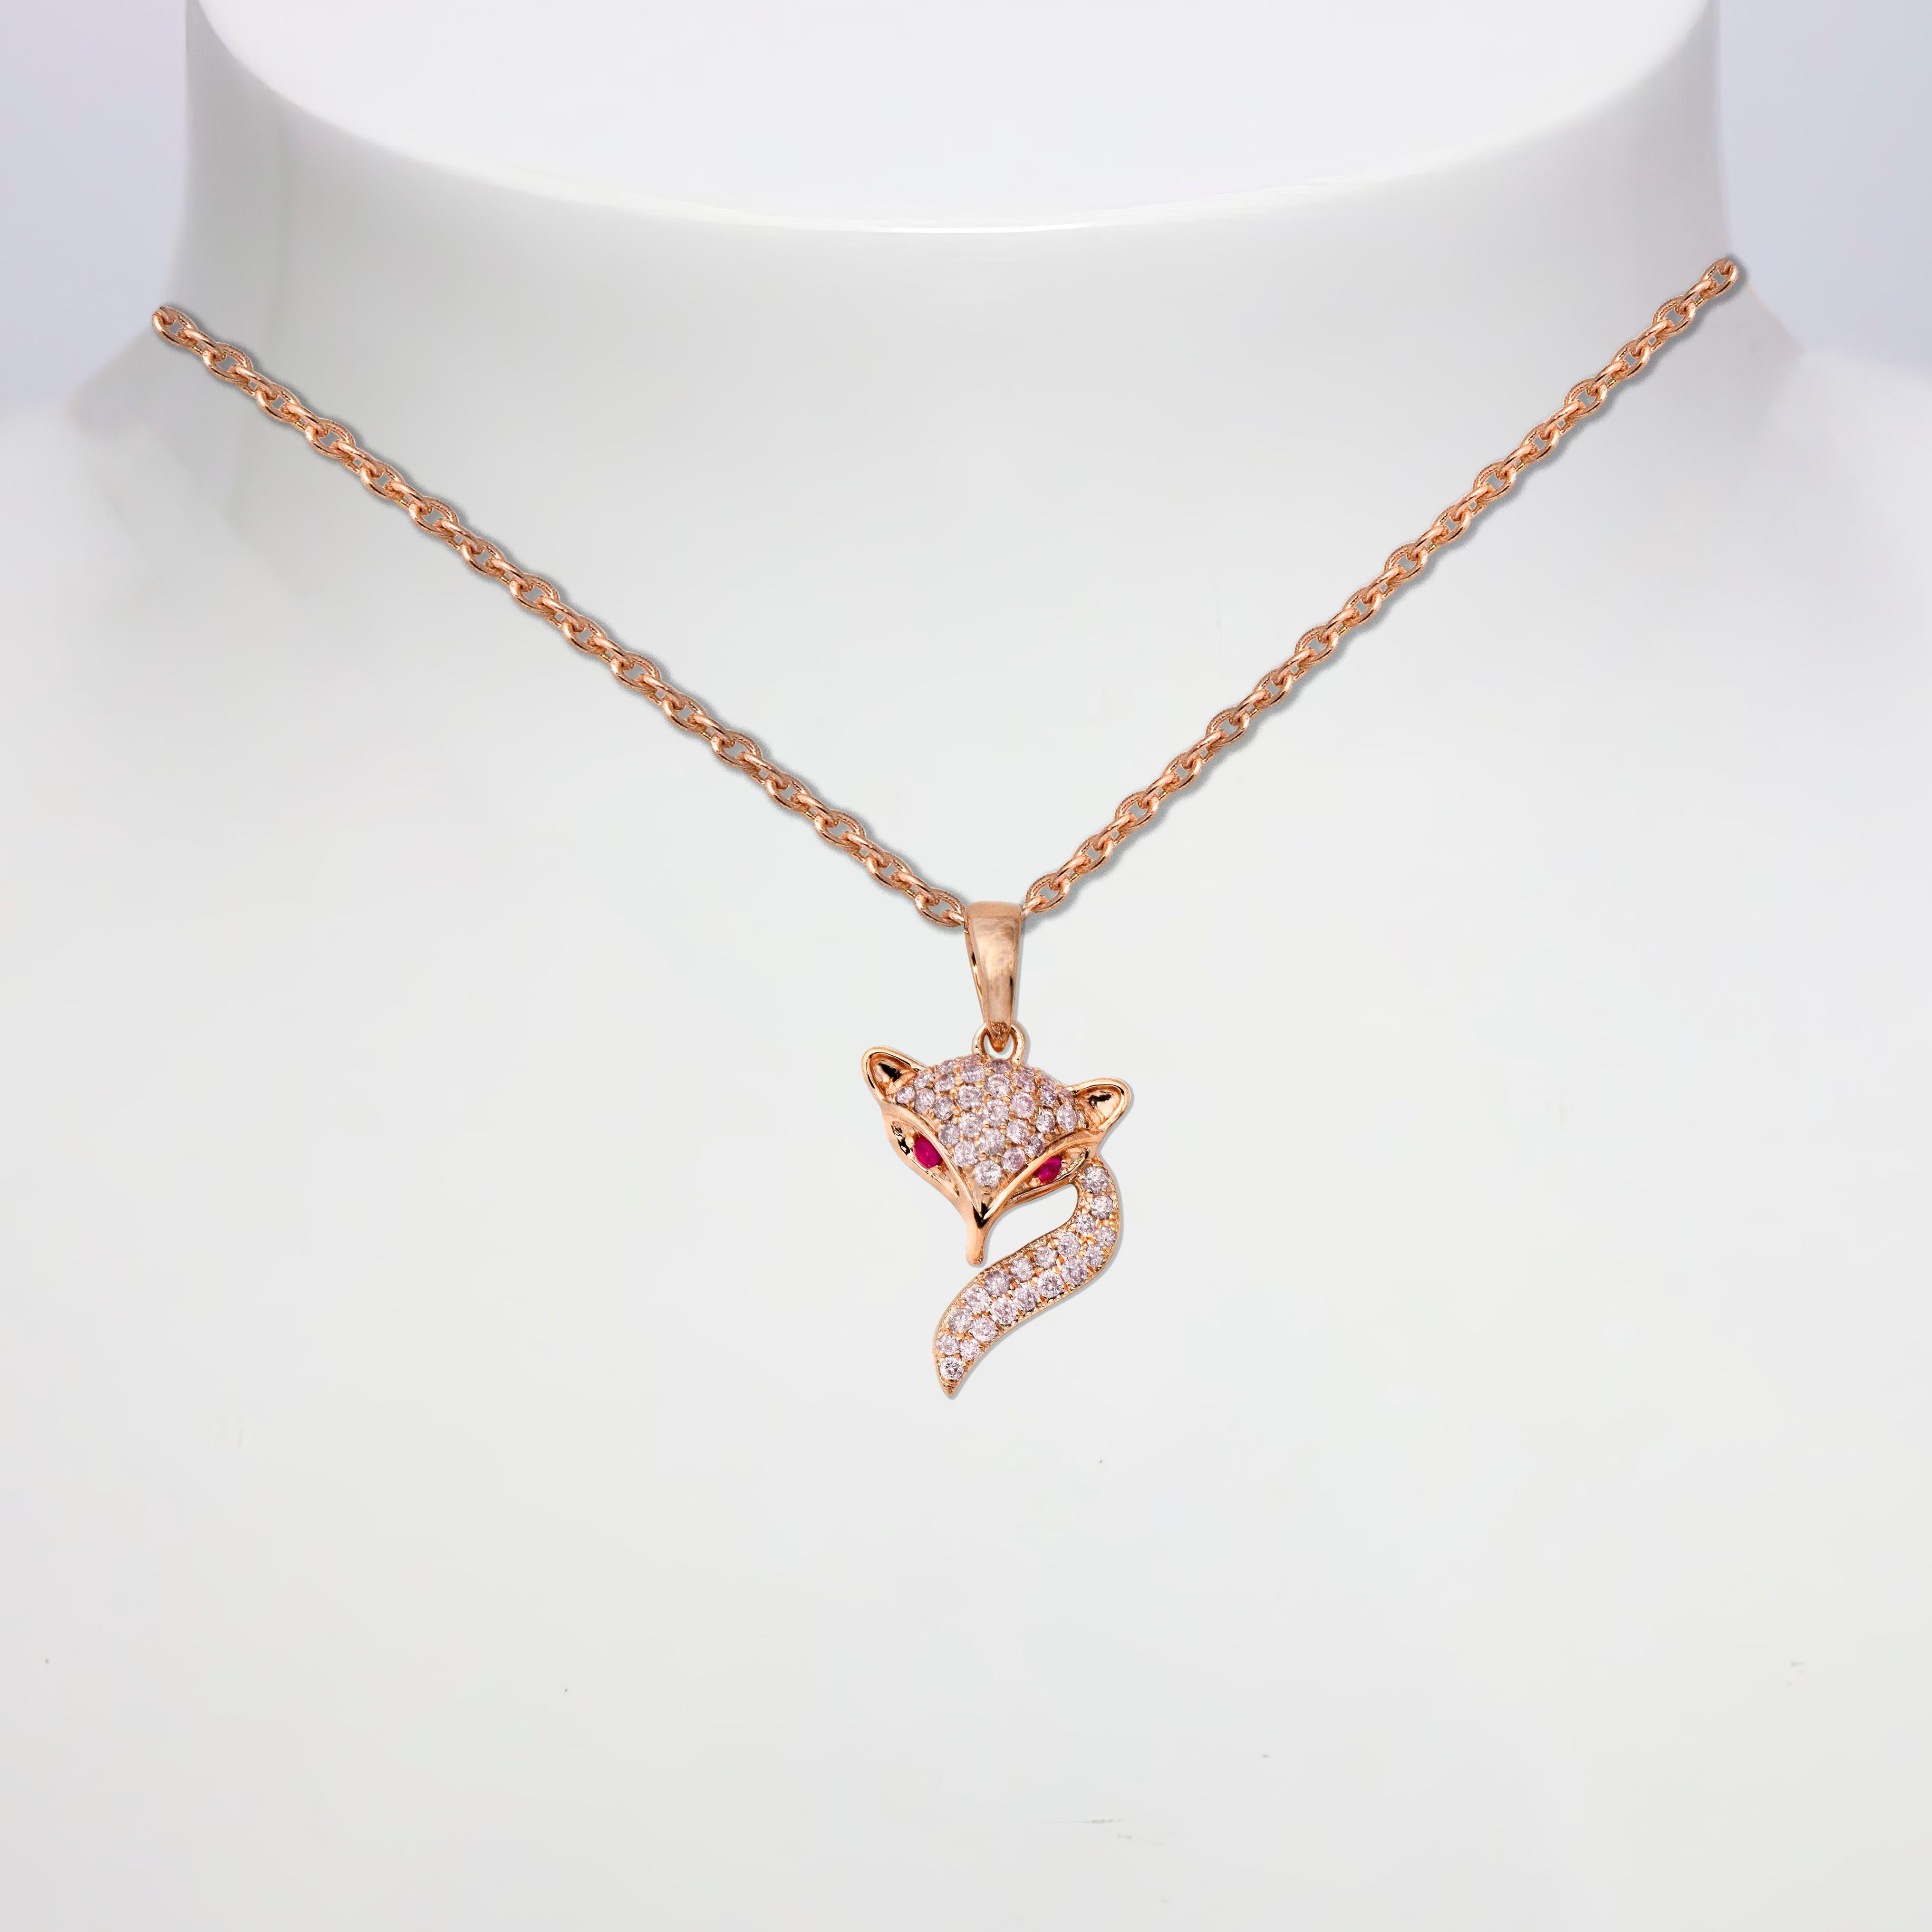 *IGI 14K 0.36 ct Natural Pink Diamonds Fox Design Pendant Necklace*

This band features a stunning design with a fox crafted from 14K rose gold. It is set with natural pink diamonds weighing 0.36 carats.

This necklace features colorful natural